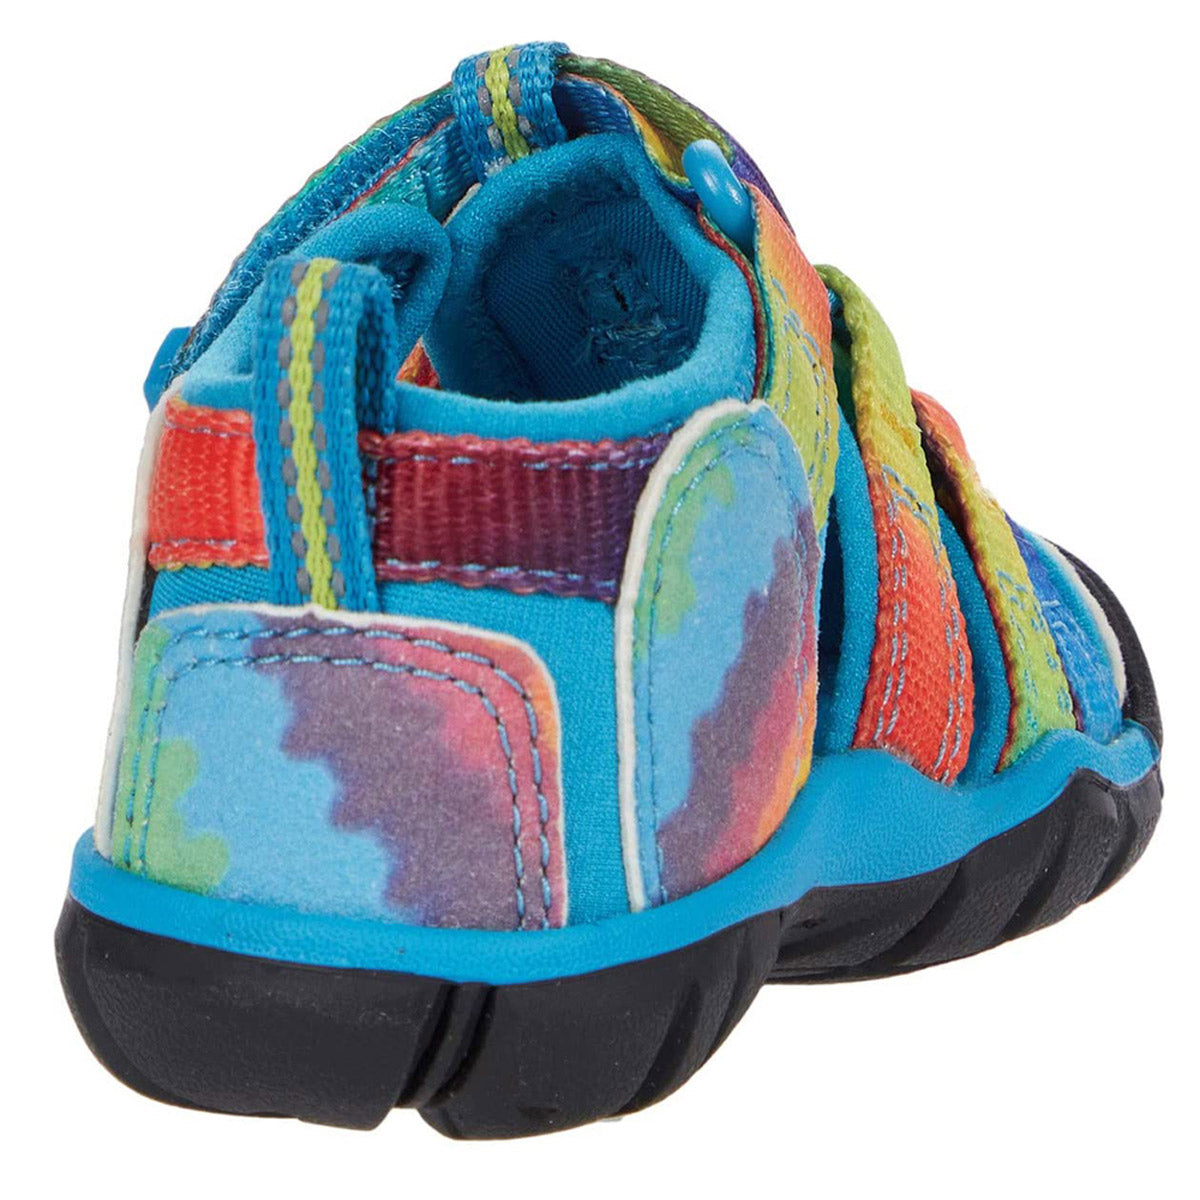 Colorful Keen child&#39;s hybrid water sandal with velcro straps shown from a rear angle.